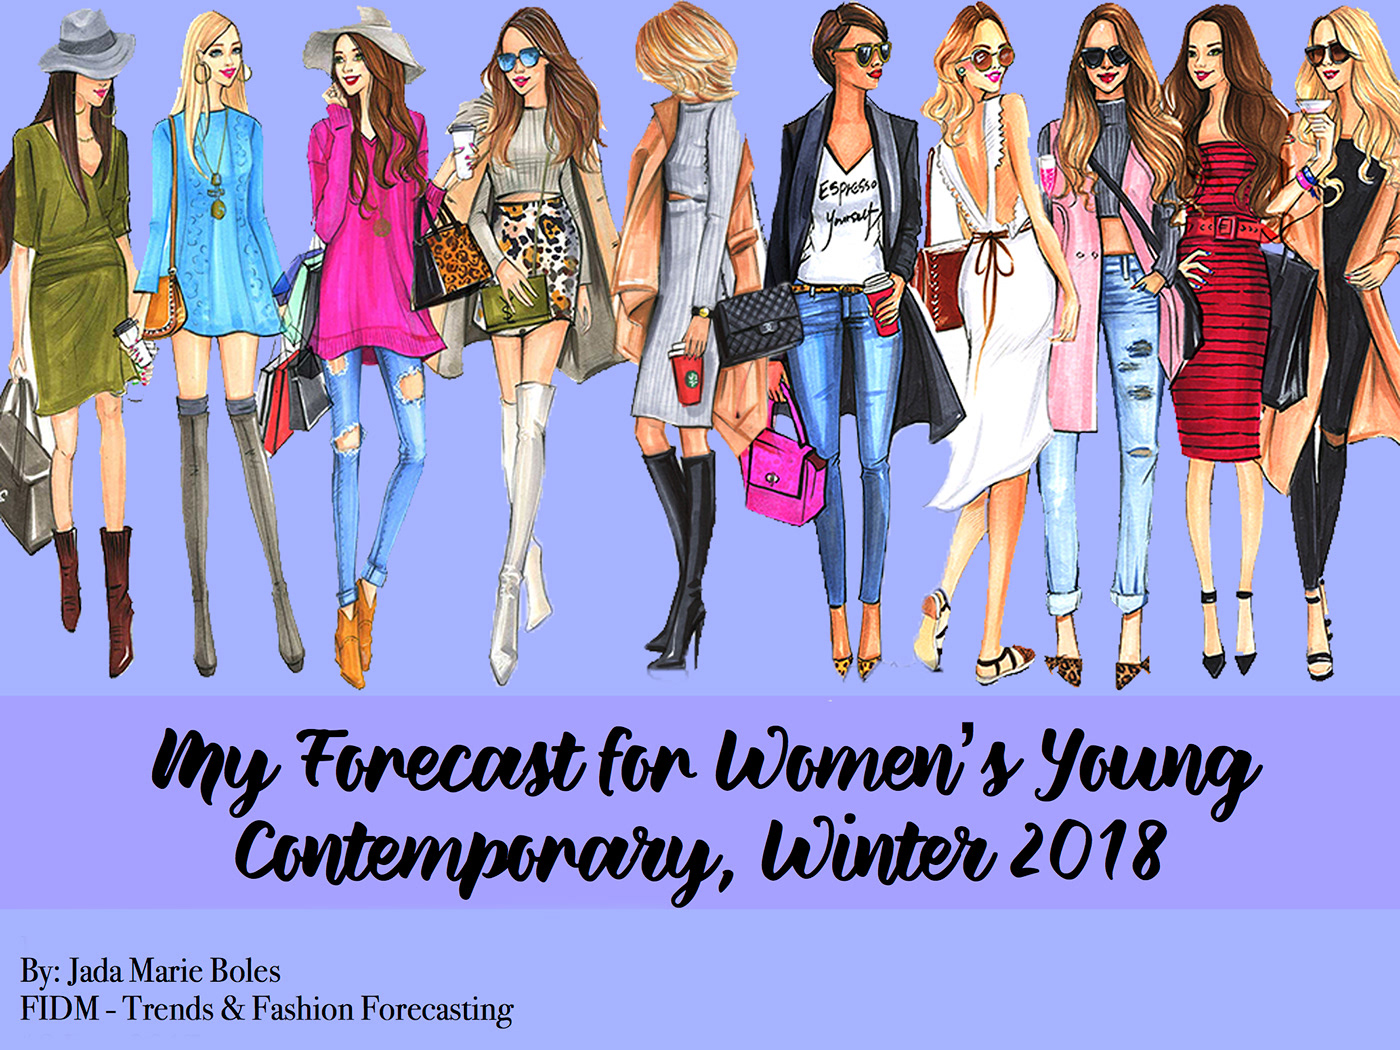 FIDM Fashion Forecasting trend research Womens Fashion Young Contemporary winter